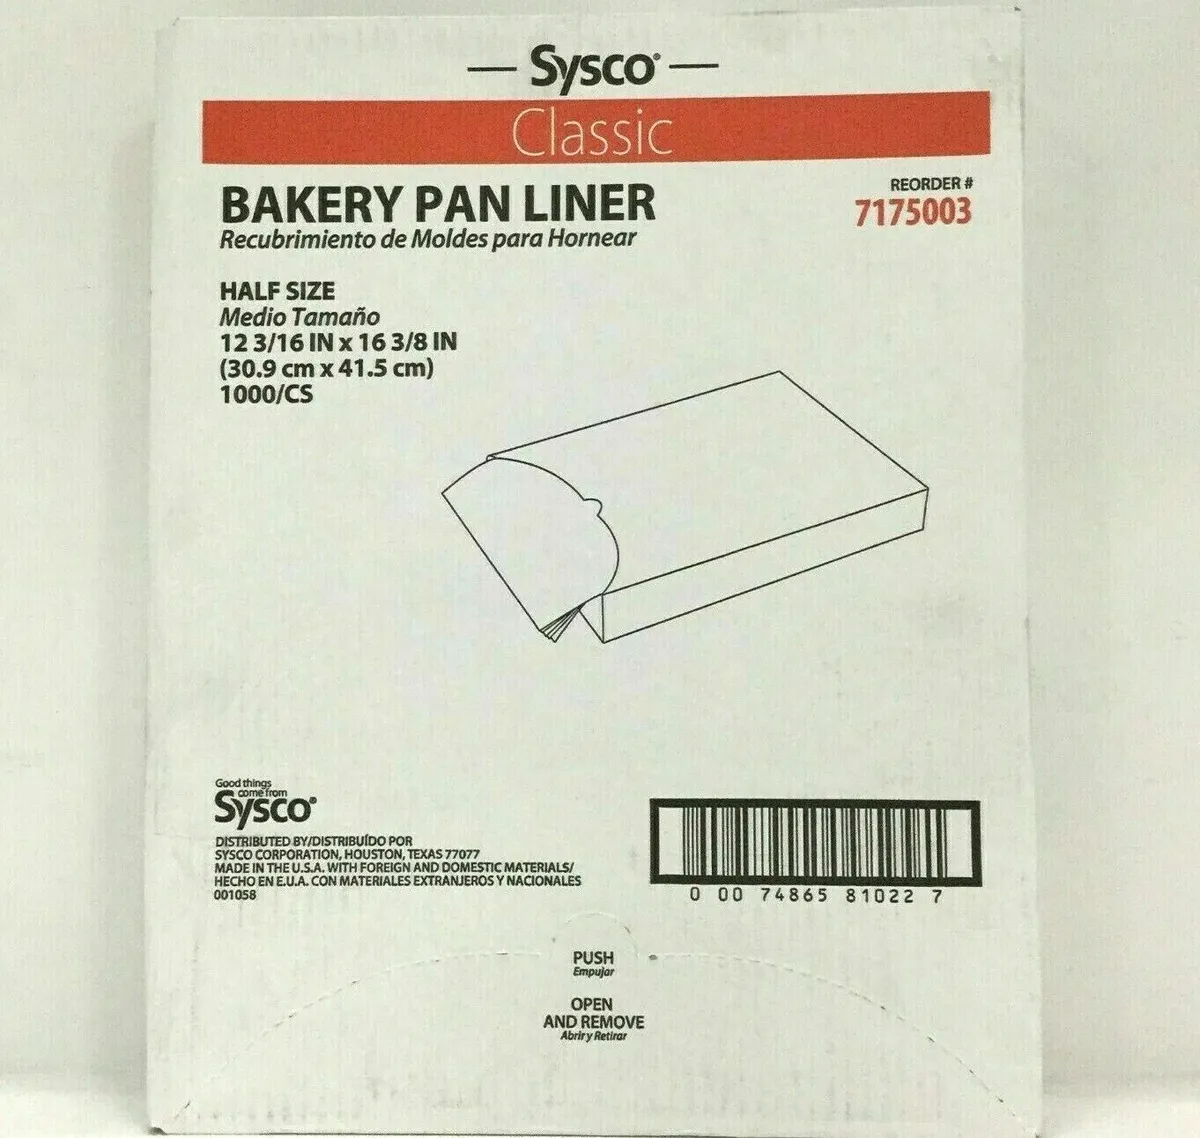 Sysco Classic Baking Pan Liners 12x16 Half Size Liners Parchment Paper  1000-Pack